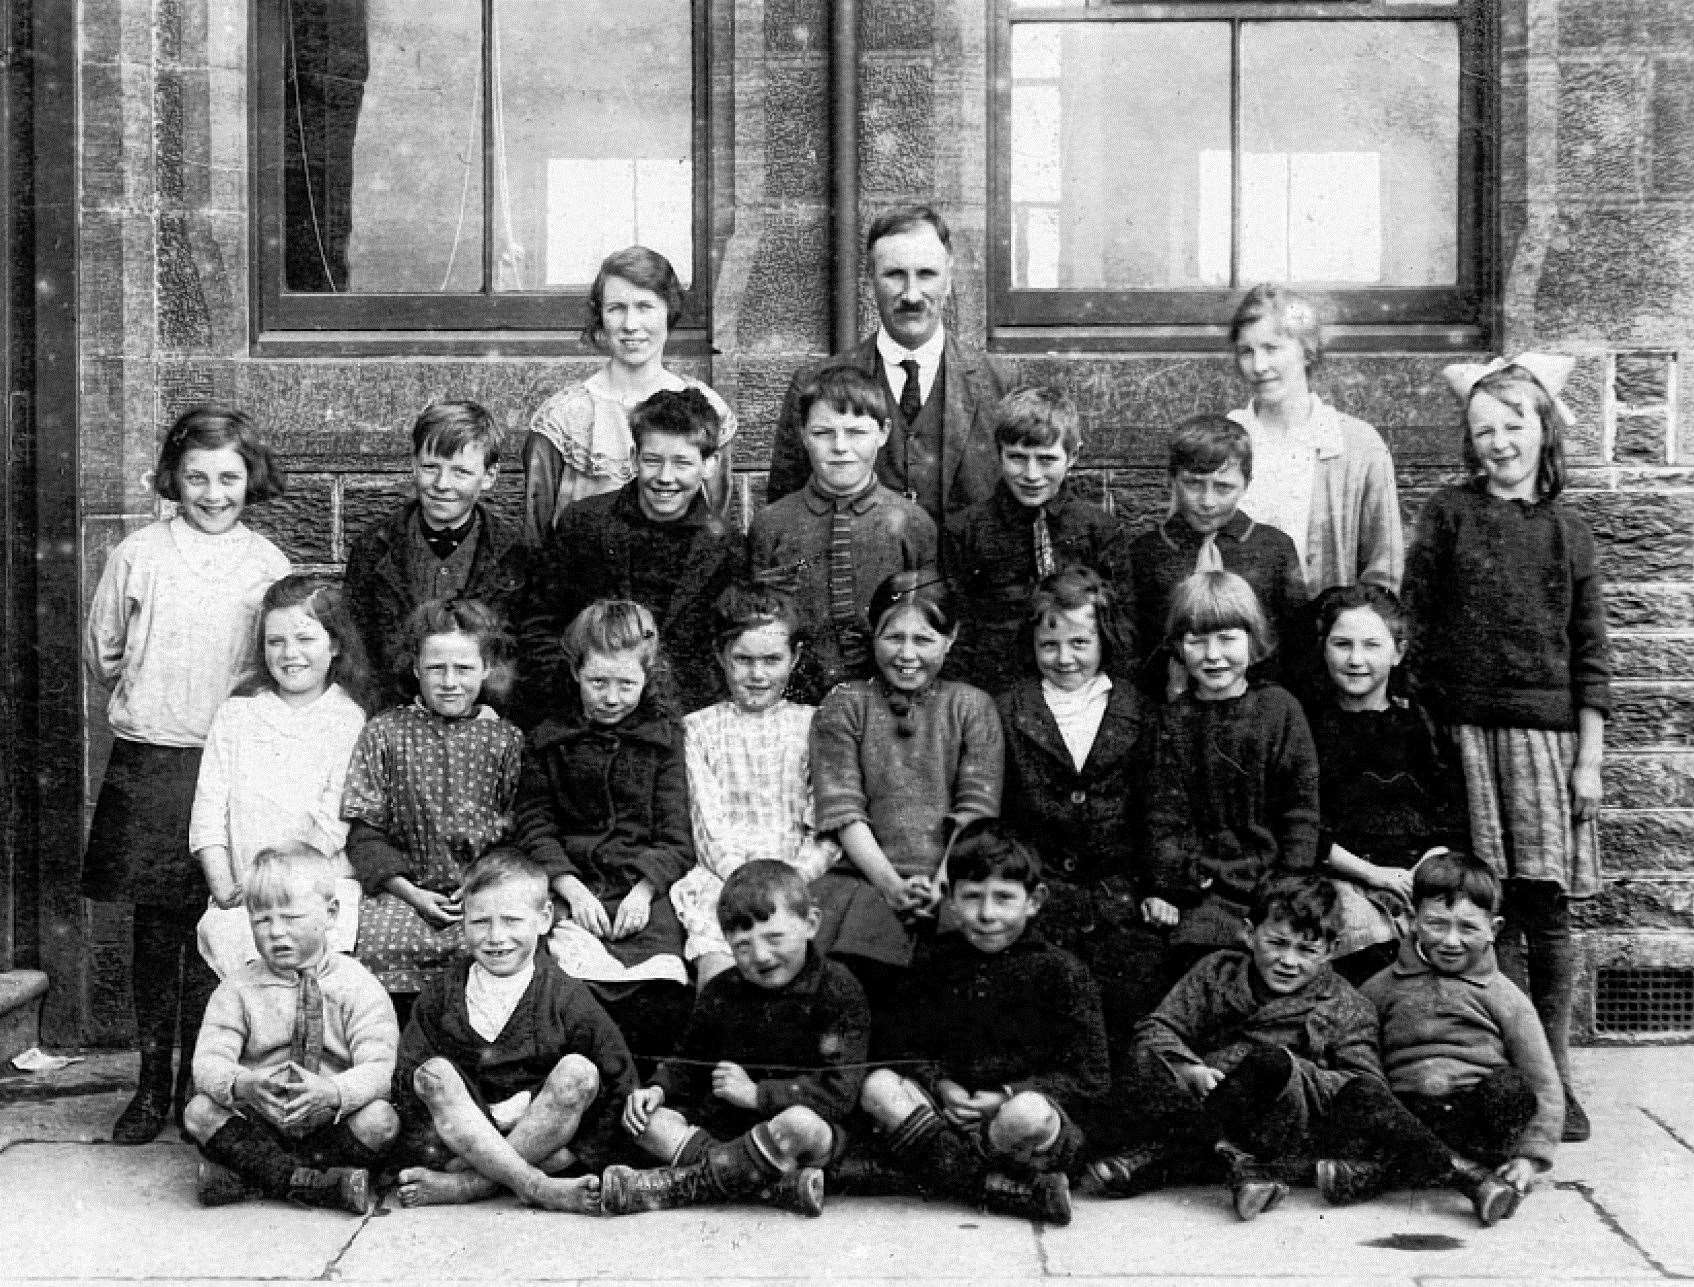 Keiss school, probably in the 1930s. The group is believed to include headmaster Mr Sutherland and teachers Miss Budge and Miss Bremner.